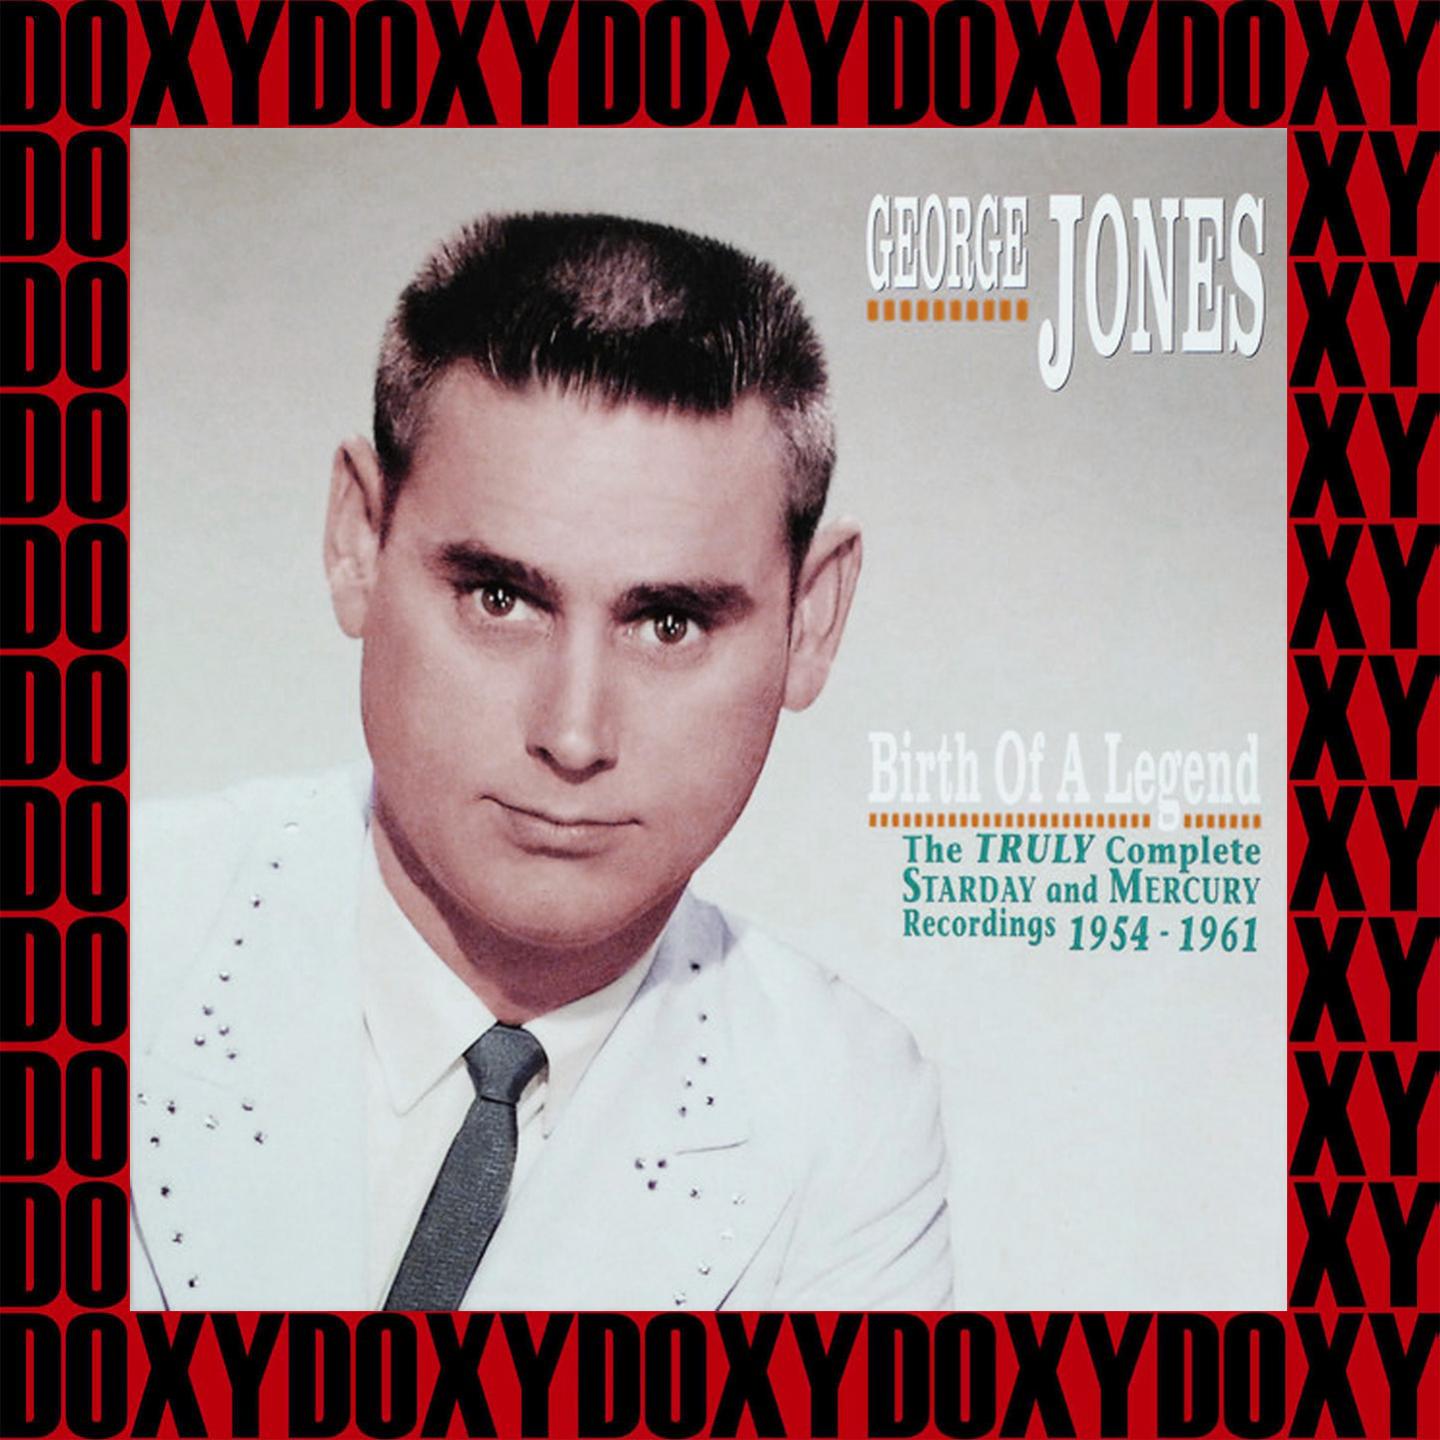 Birth Of A Legend, 1954-1961 Vol. 2 (Remastered Version) (Doxy Collection)